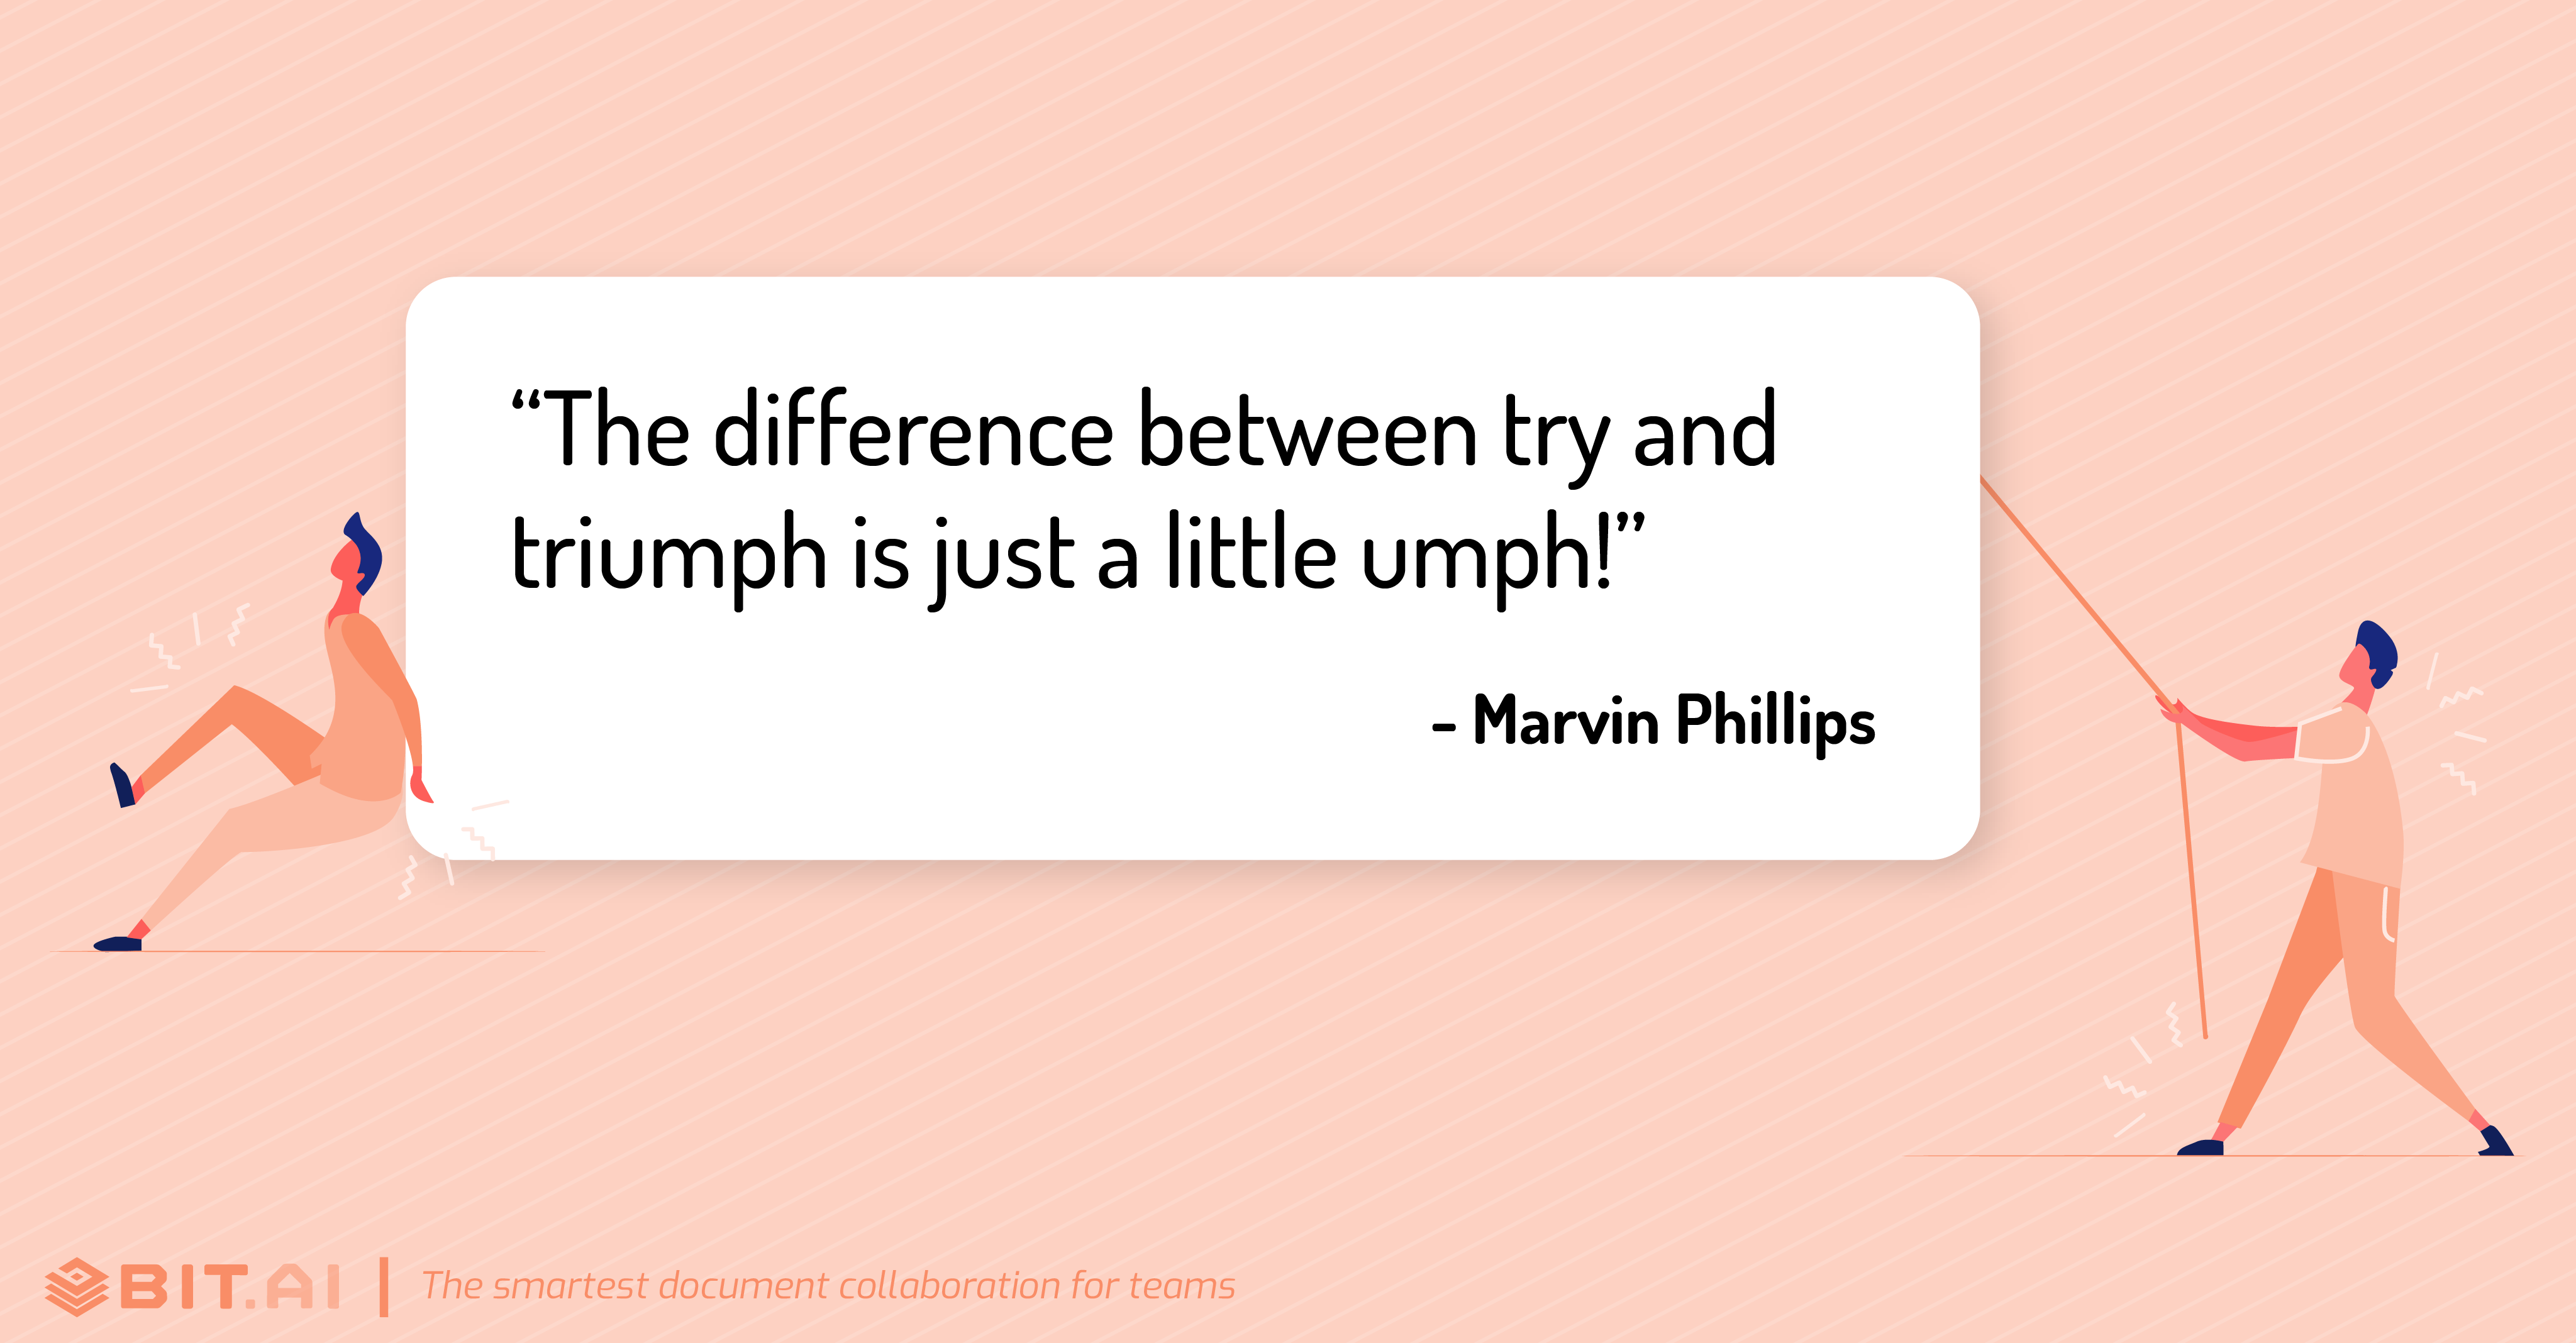 Hard work quote by Marvin Phillips